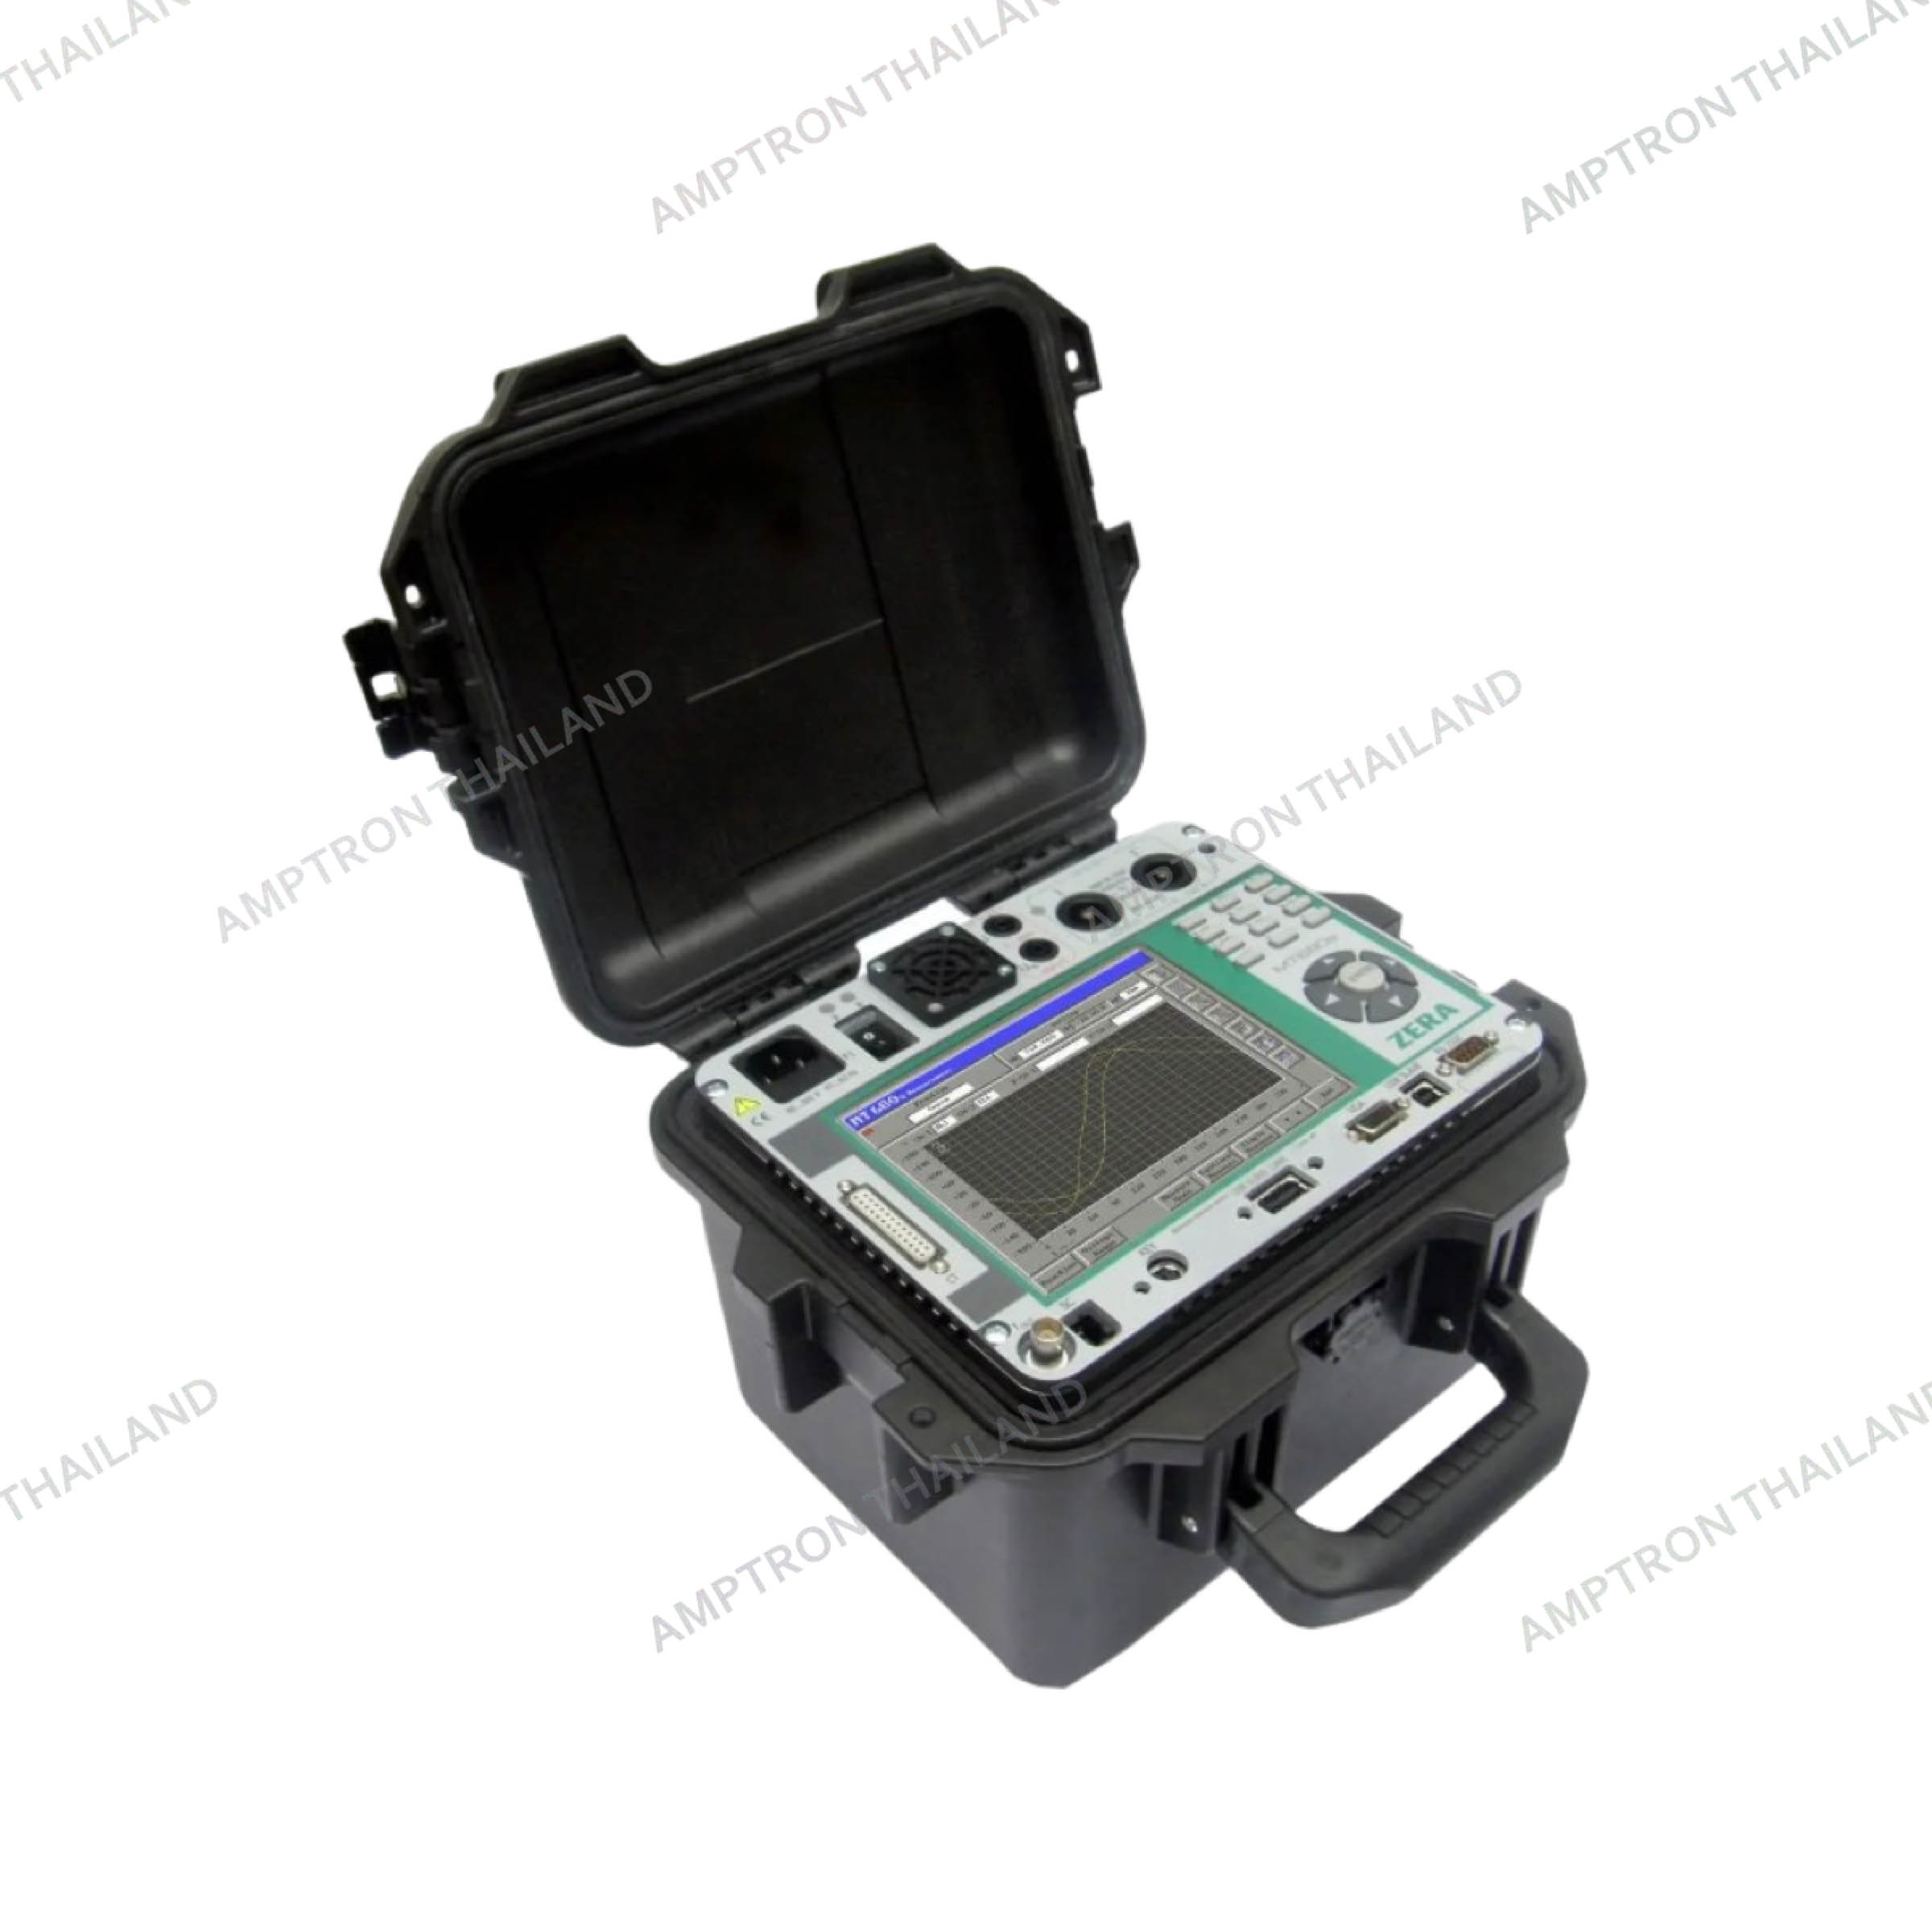 MT680s Portable Test System